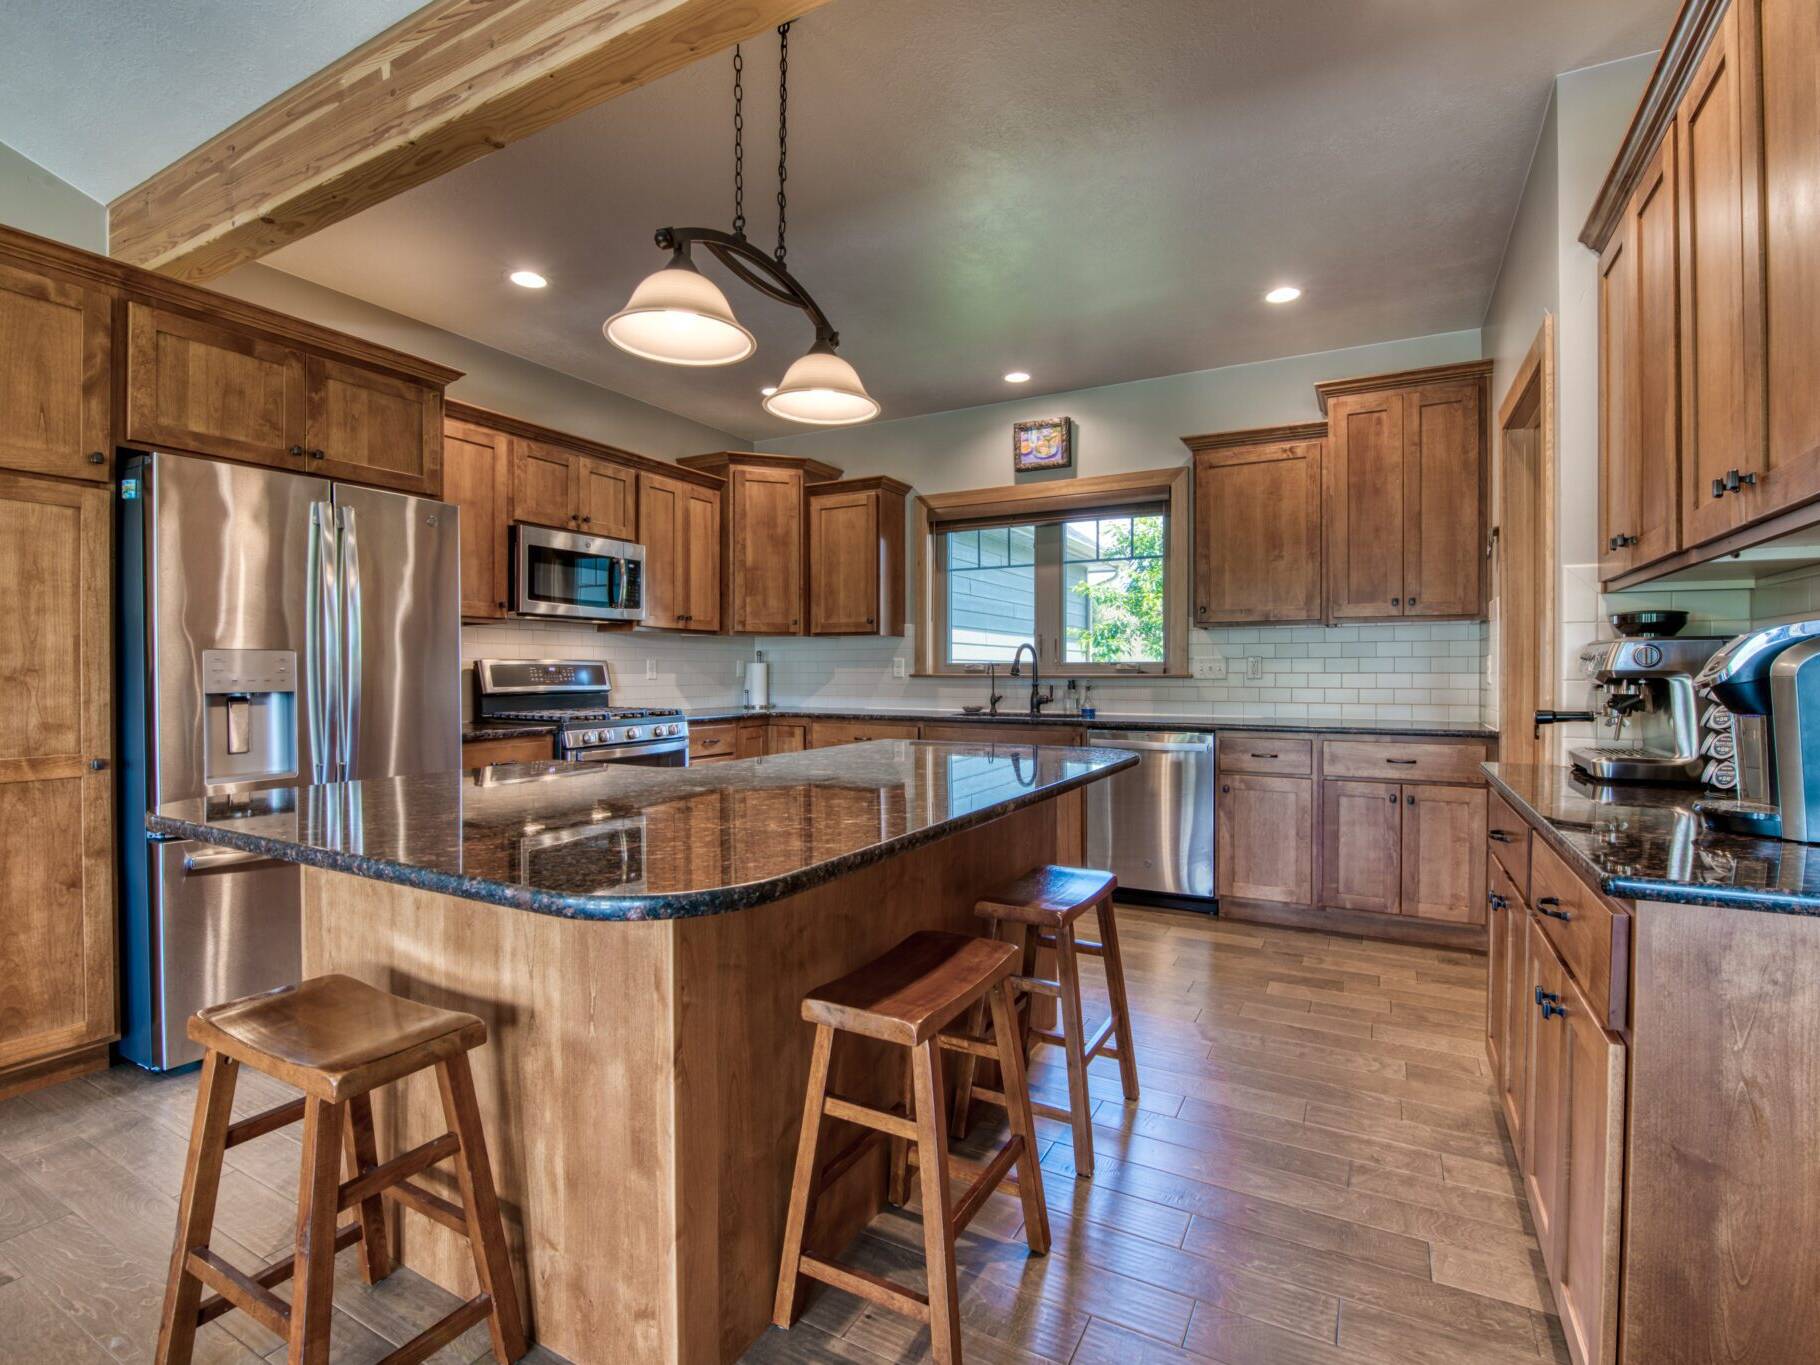 Kitchen with hardwood flooring, wood cabinetry, granite countertops, and tiled backsplash in a custom home in Hamilton, MT